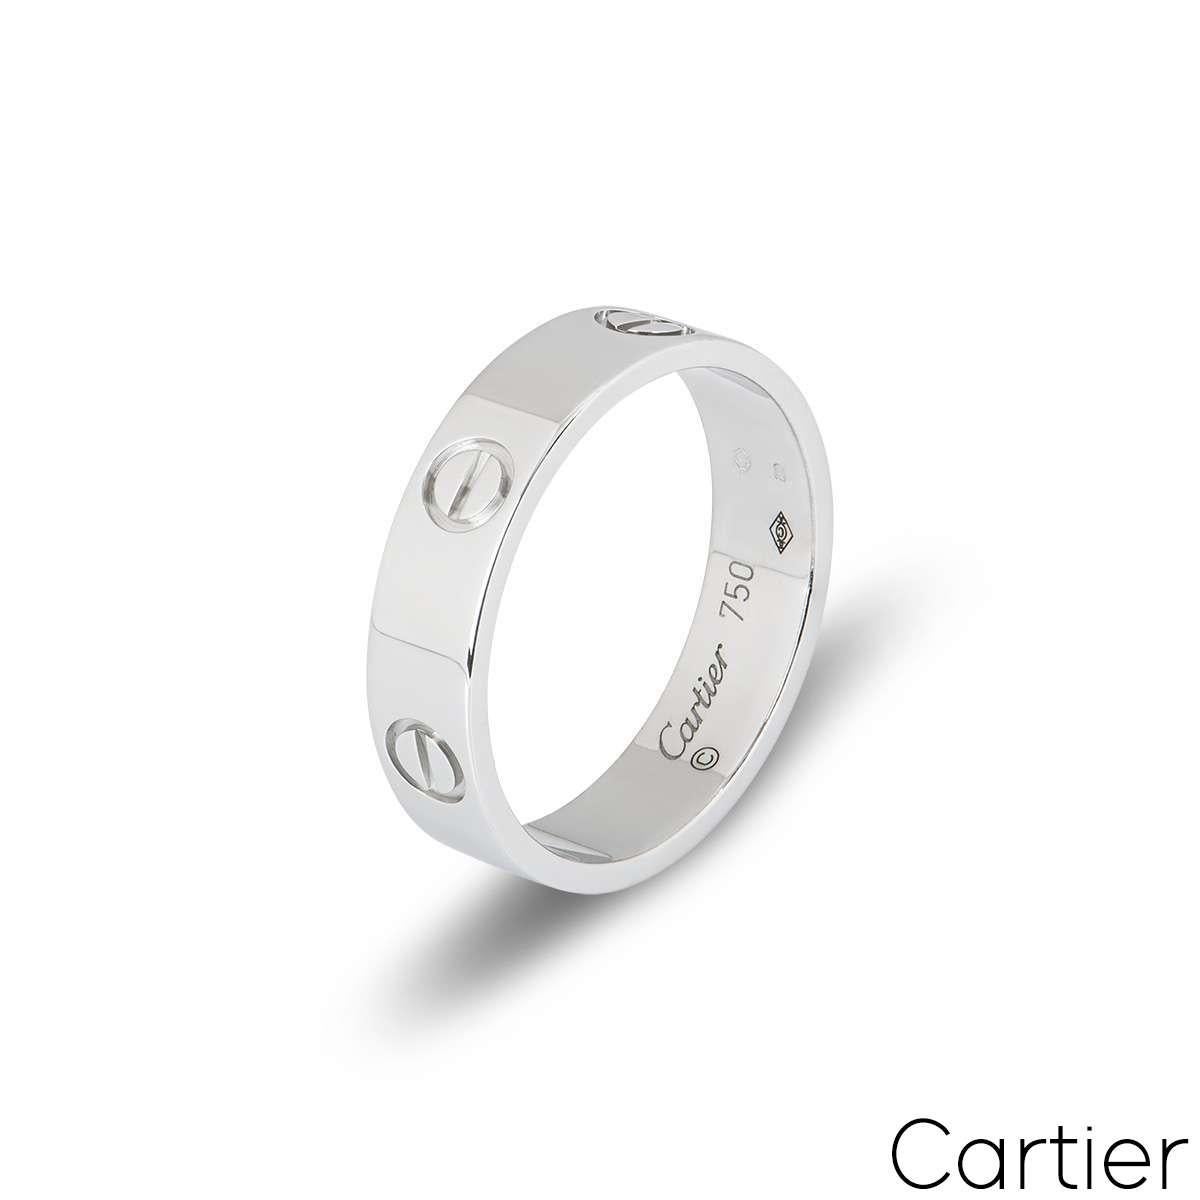 A signature Cartier ring in 18k white gold from the Love collection. The ring comprises of the iconic screw motifs on the outer edge. Measuring 5.5mm in width and a size UK N - EU 53, this ring has a gross weight of 6.79 grams.

Comes complete with